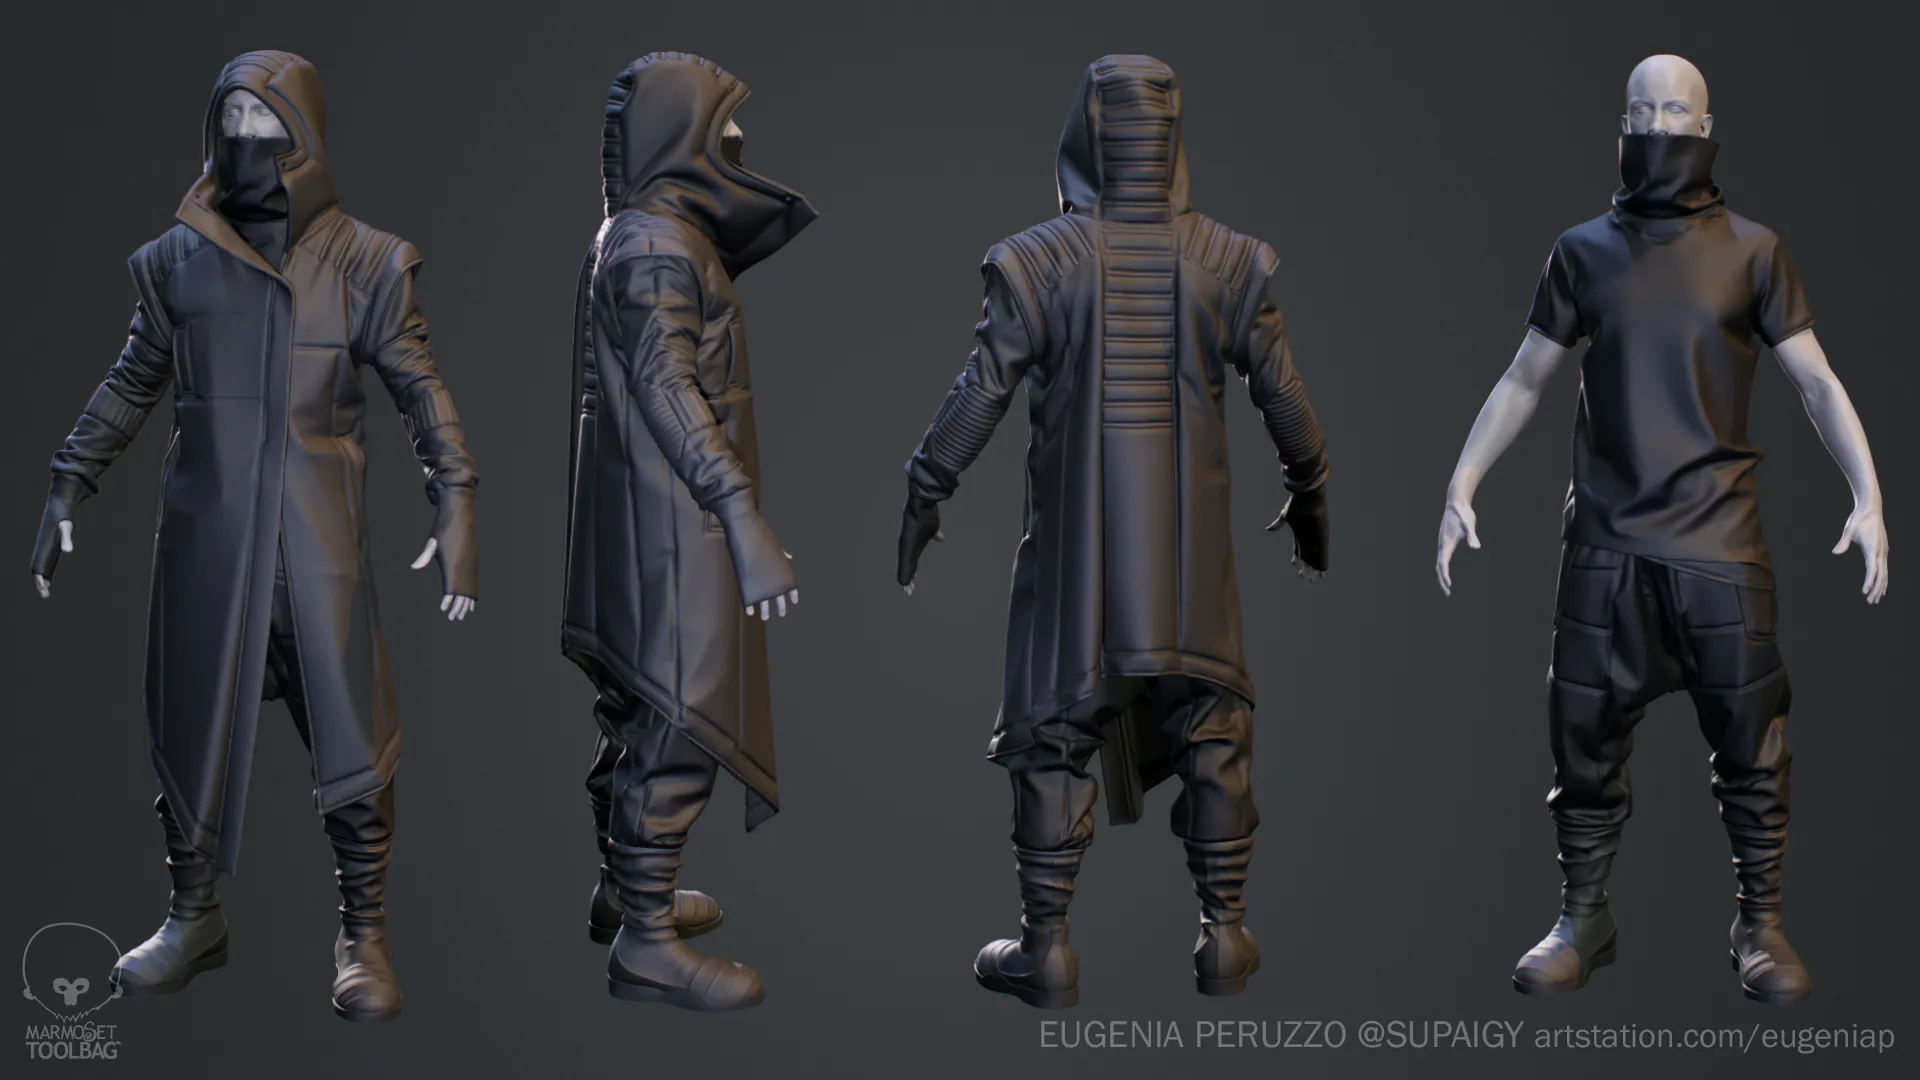 Creating a Cyberpunk Style Outfit in Marvelous Designer with Eugenia  Peruzzo - ArtStation Magazine